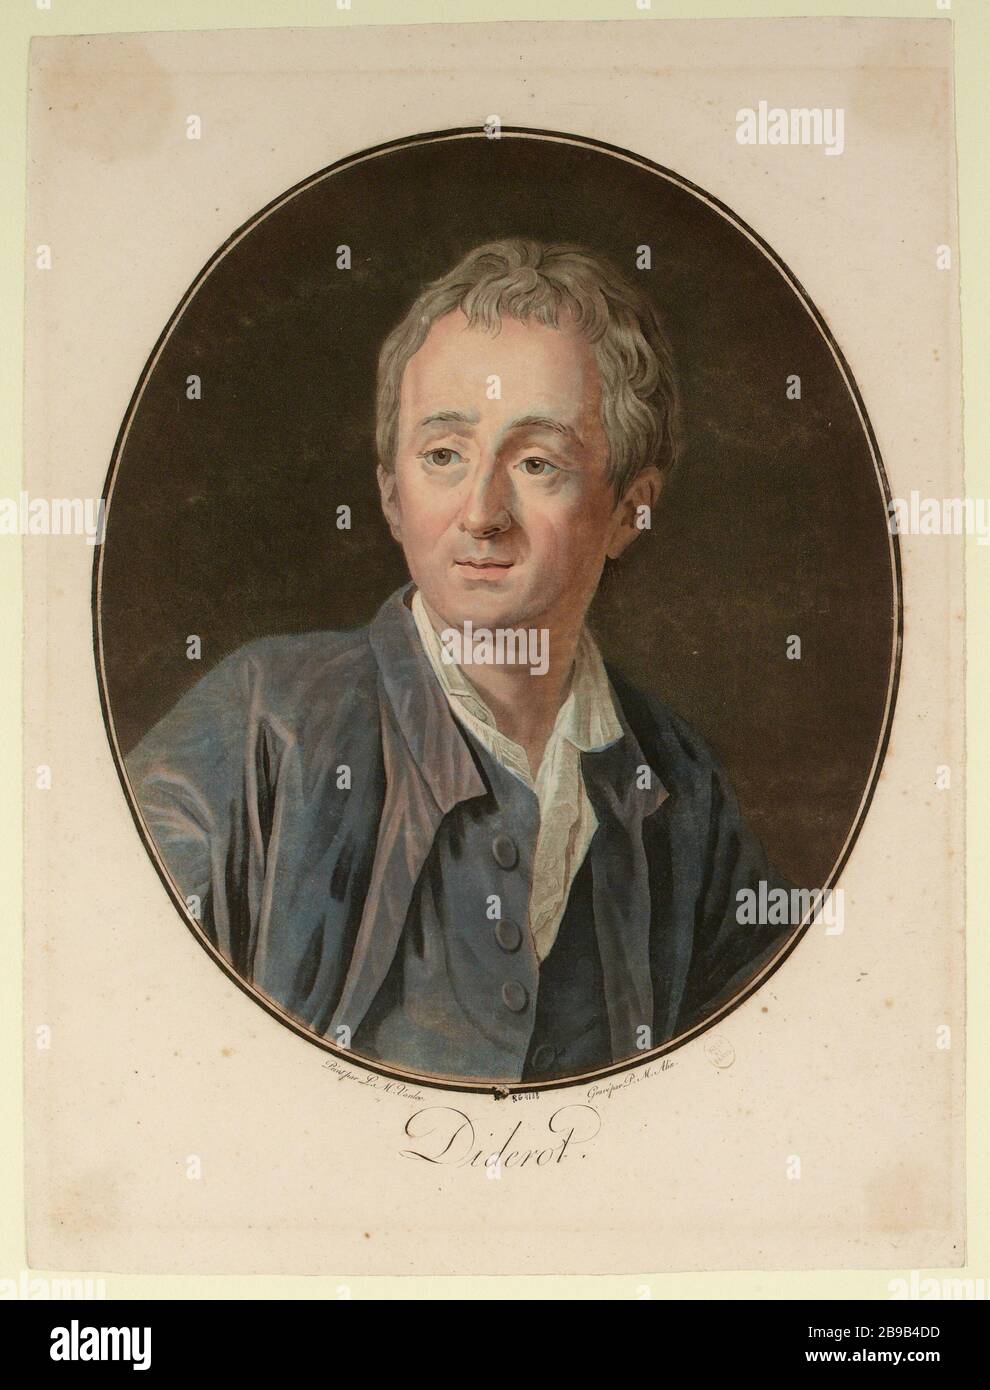 Portrait of Denis Diderot, Collection of Great Men (1713-1784), philiosophe, writer, encyclopedist (dummy title) Stock Photo